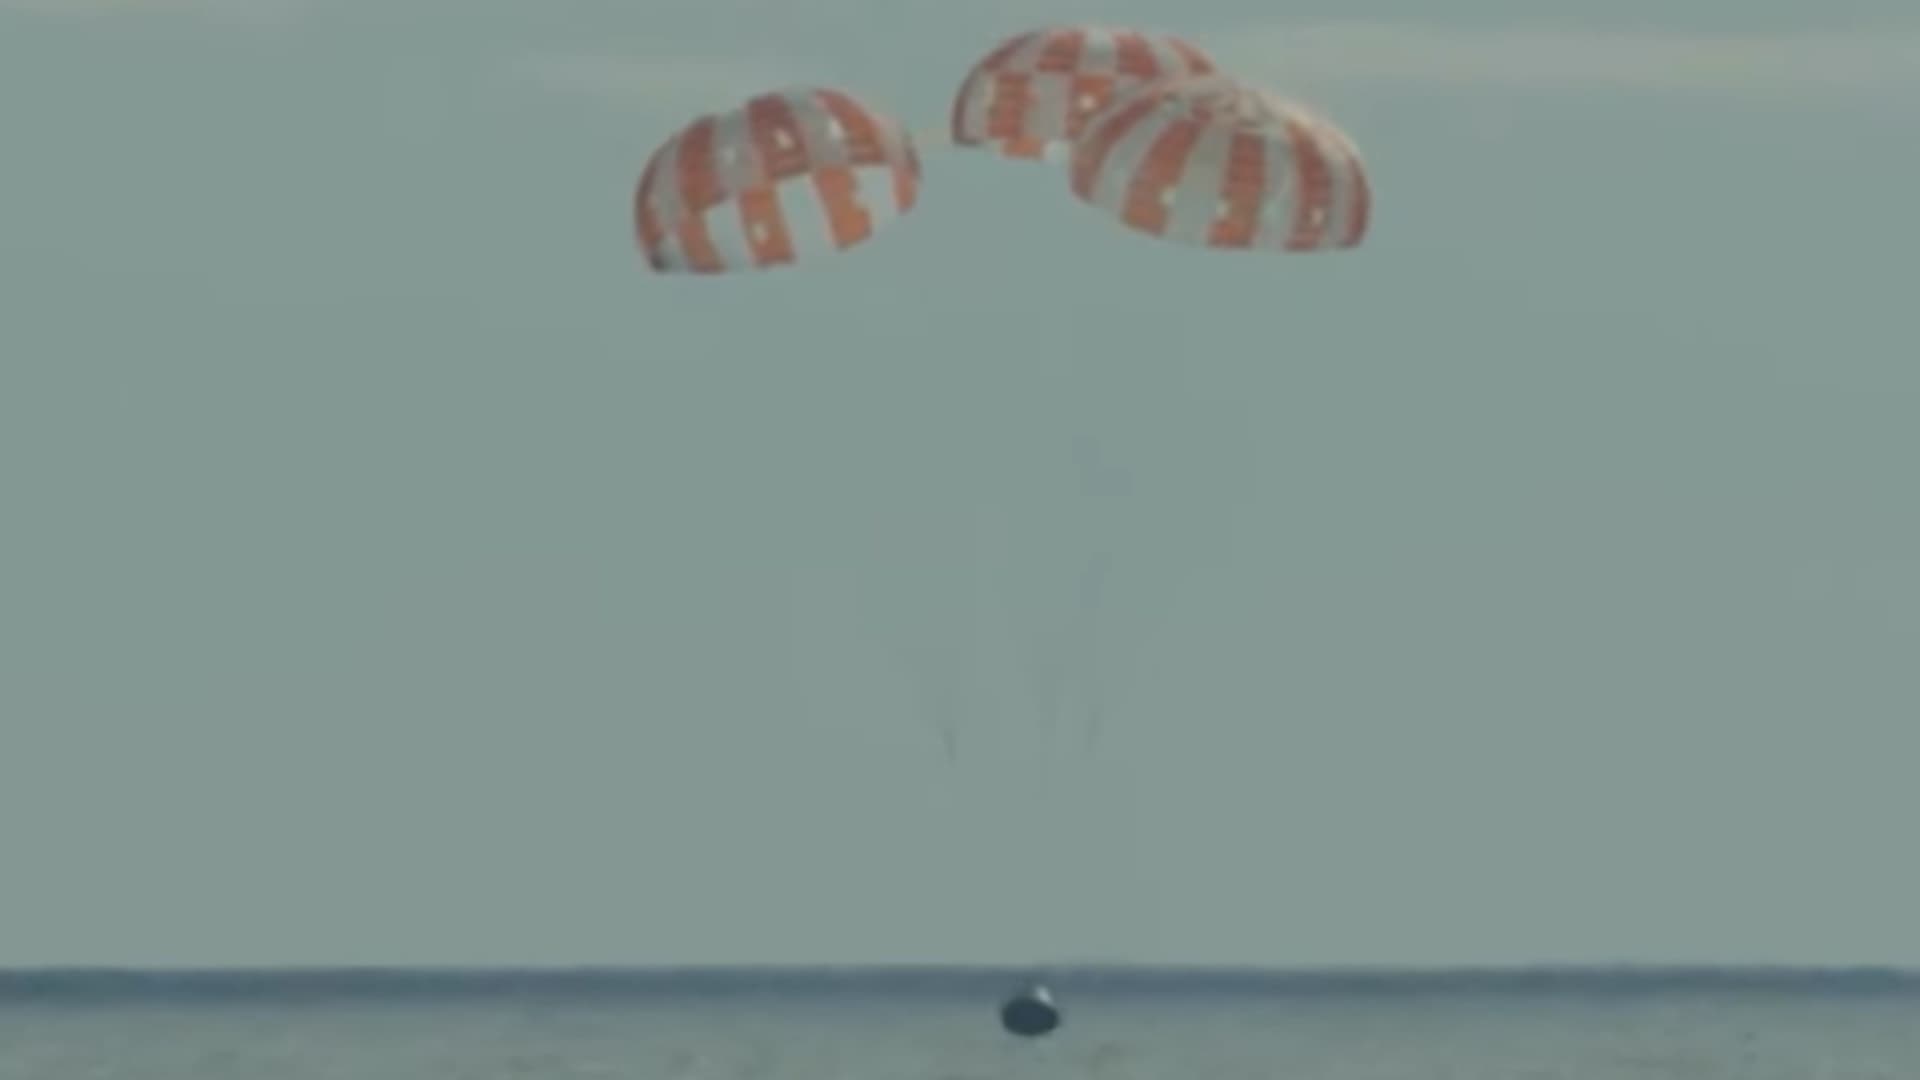 NASA completes Artemis I moon mission with Orion capsule splash down